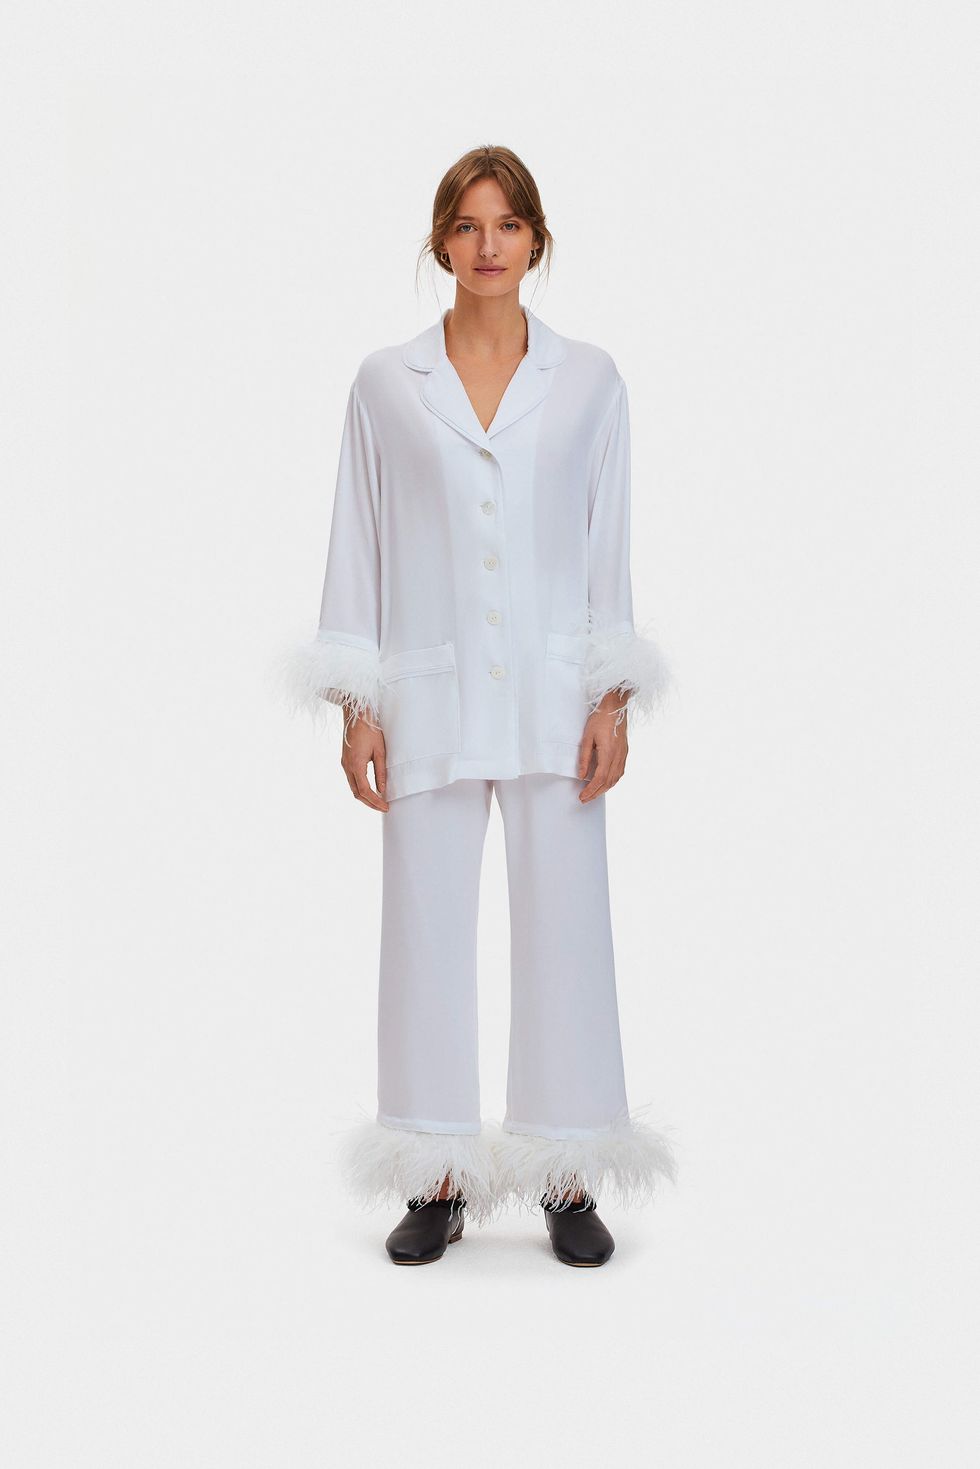 PSA: Sleeper's cult party pyjama sets are on sale right now